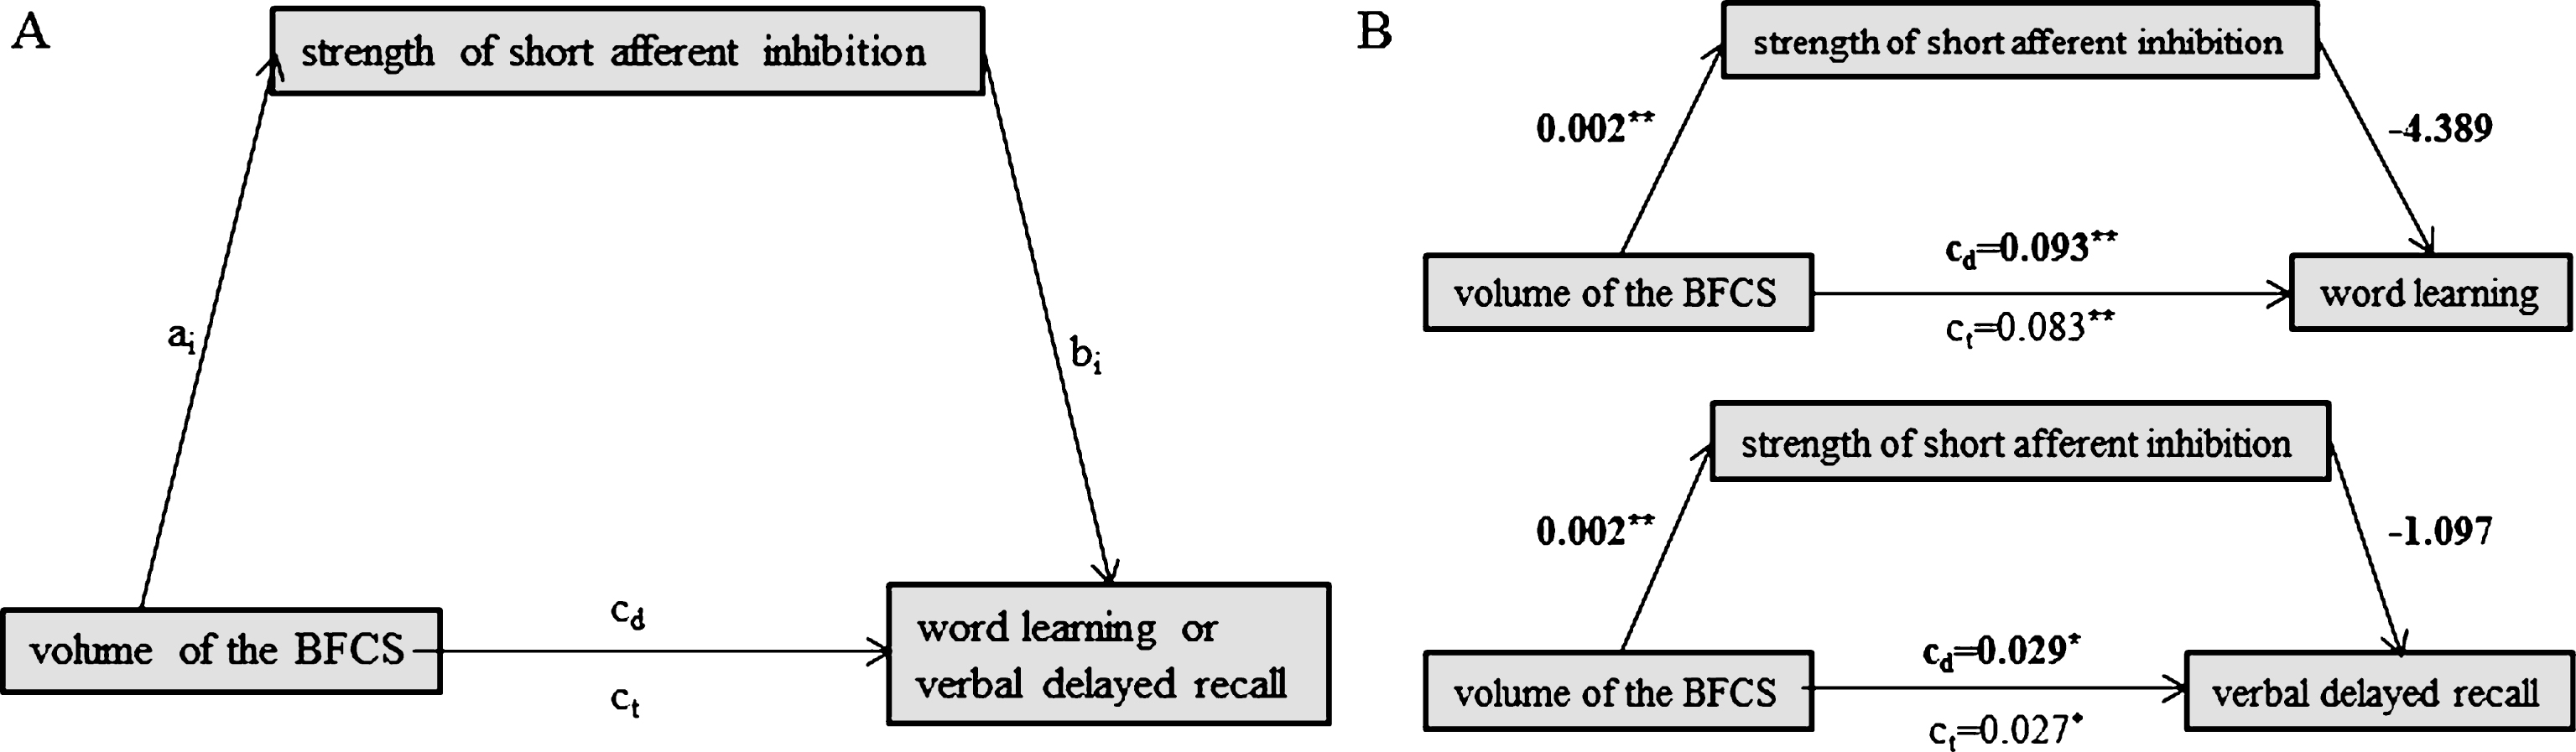 Schematic of mediation (A) and the calculated mediating effects of short afferent inhibition strength on the relationship between volume of the BFCS and word learning (B, top) or verbal delayed recall (B, bottom). All path weights refer to standardized regression coefficients; ct denotes the total effect and cd the direct effect of the predictor on the outcome variable. *Significant at α= 0.05, **α= 0.01, ***α< 0.001, two-tailed.